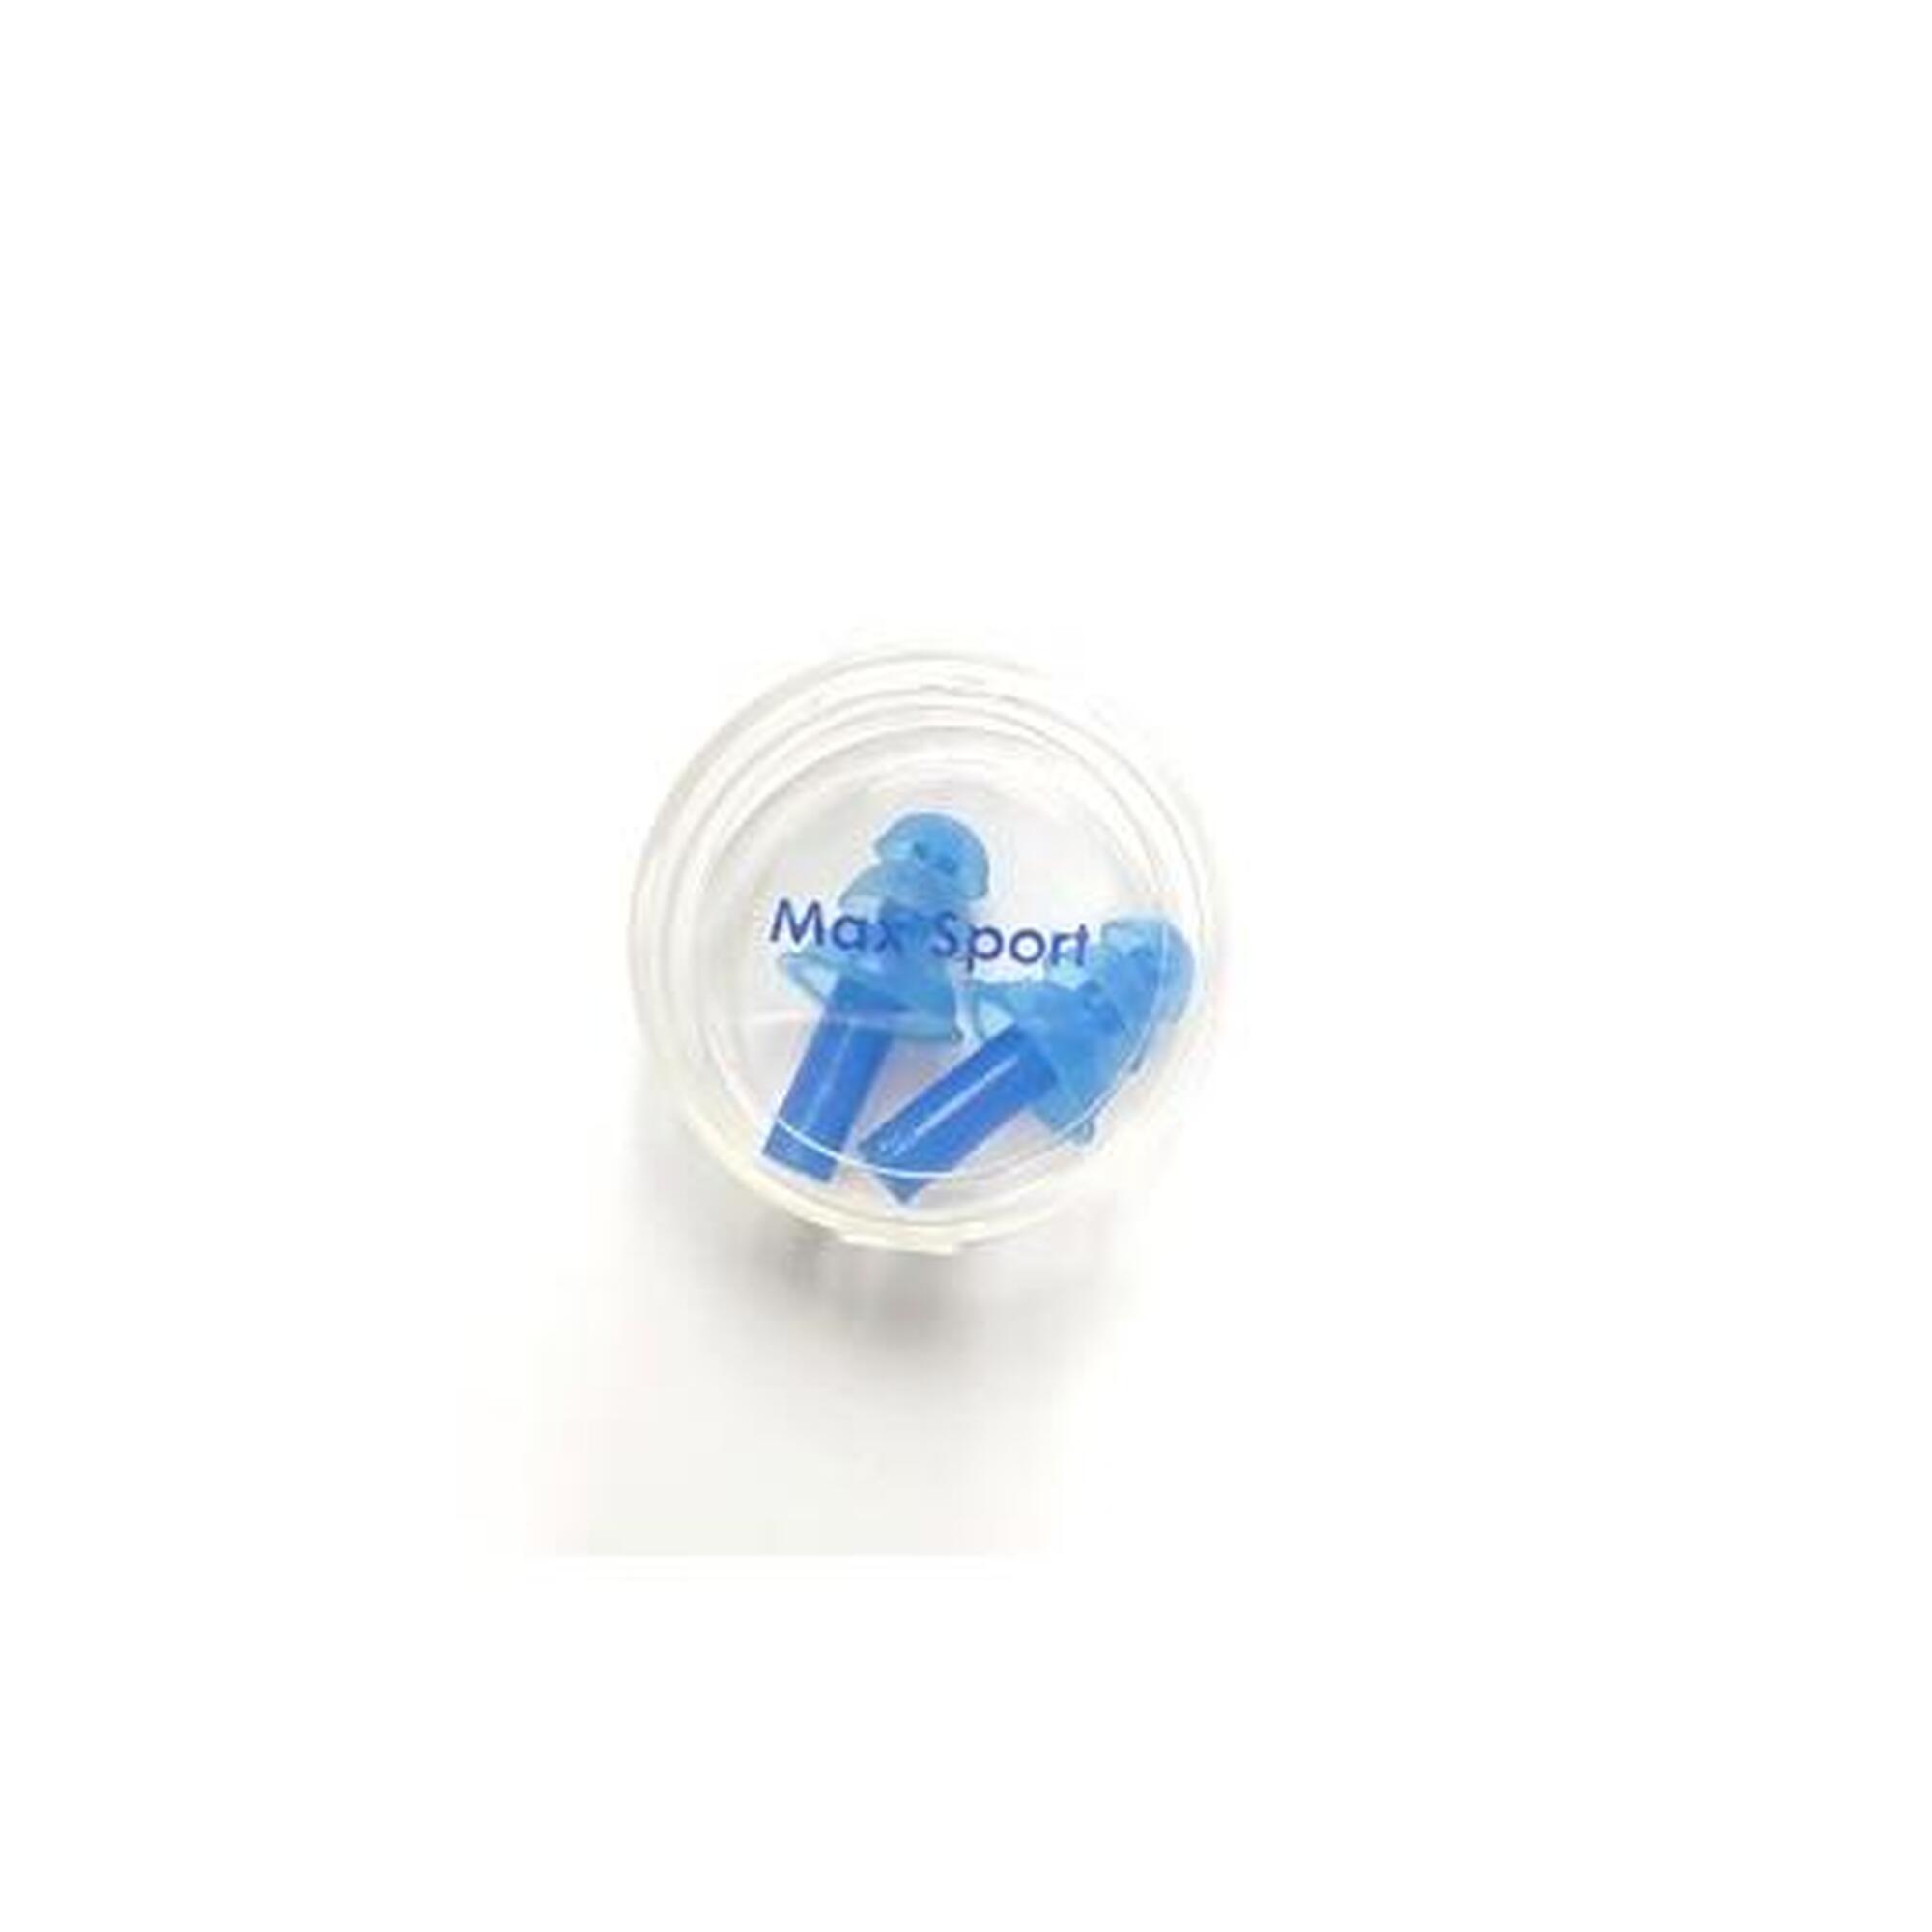 MS-9058 Silicone Swimming Ear Plugs (One Pair) - Blue